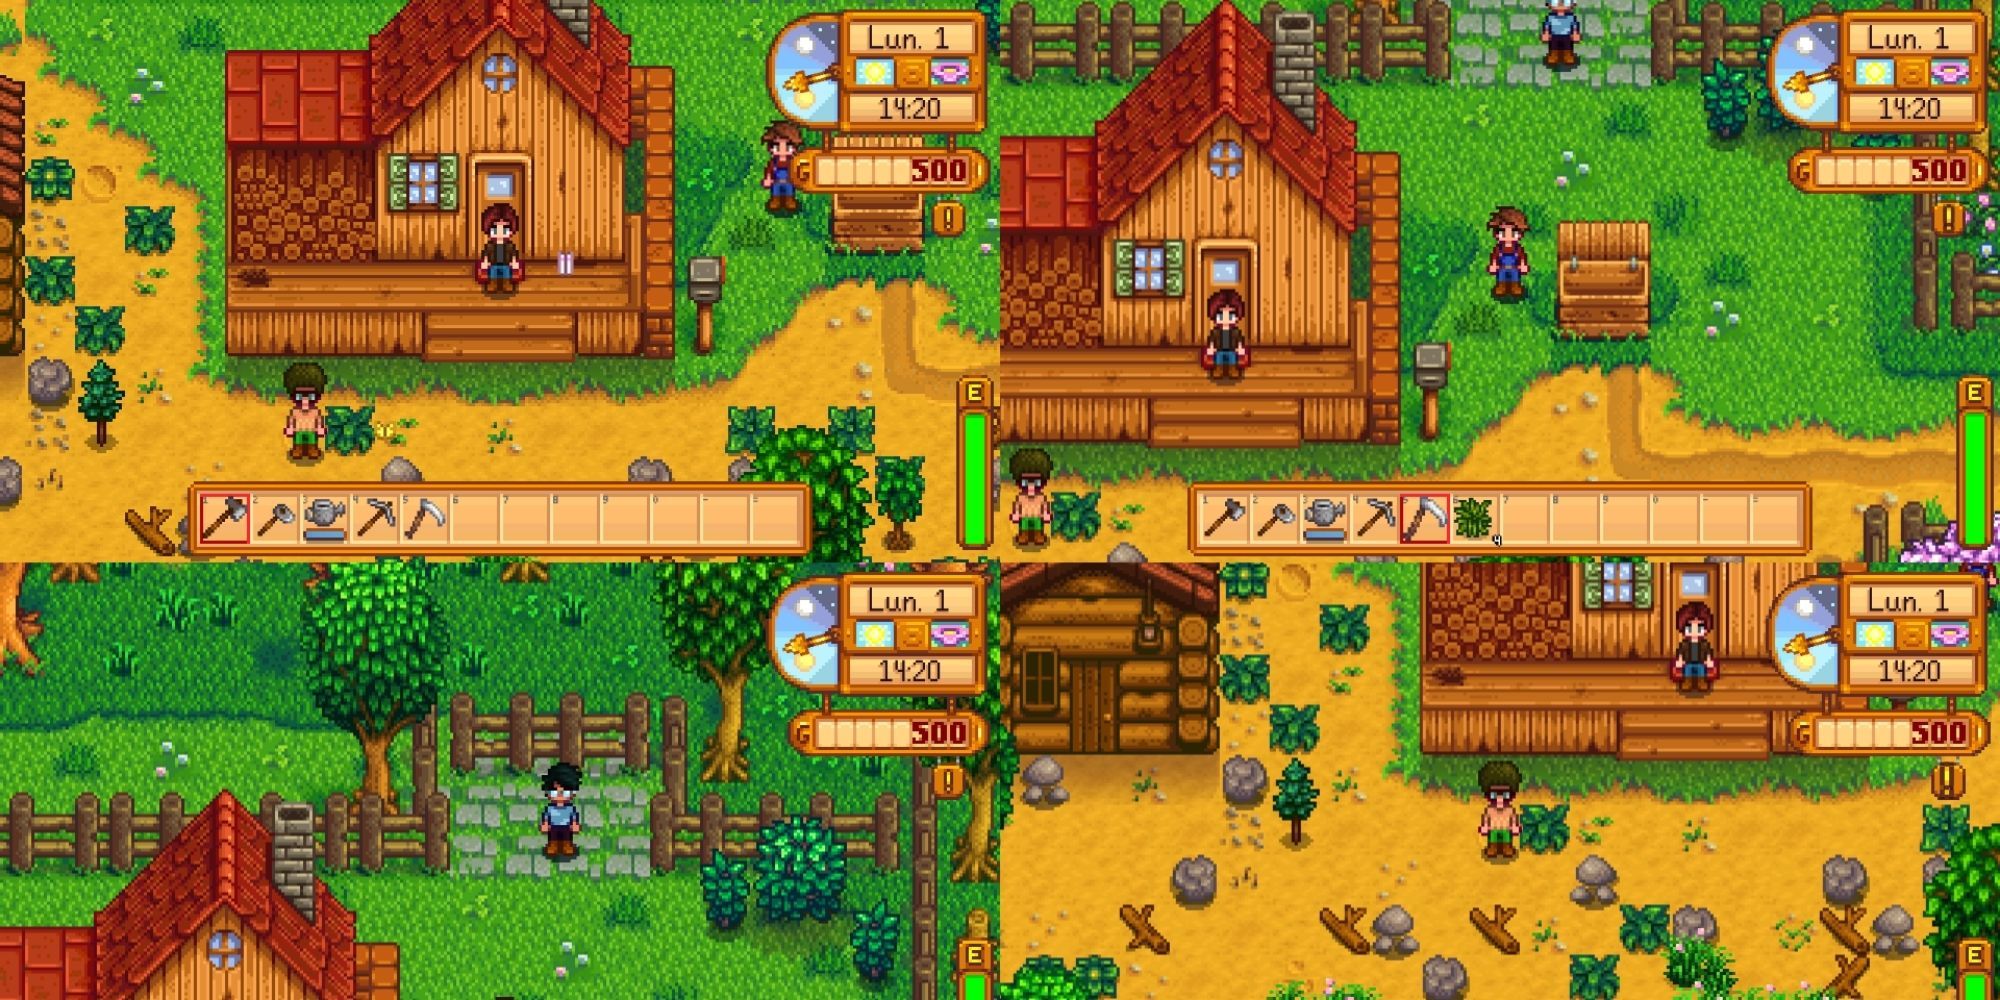 Stardew Valley Split-Screen 4-Player (4 players on a standard farm together)